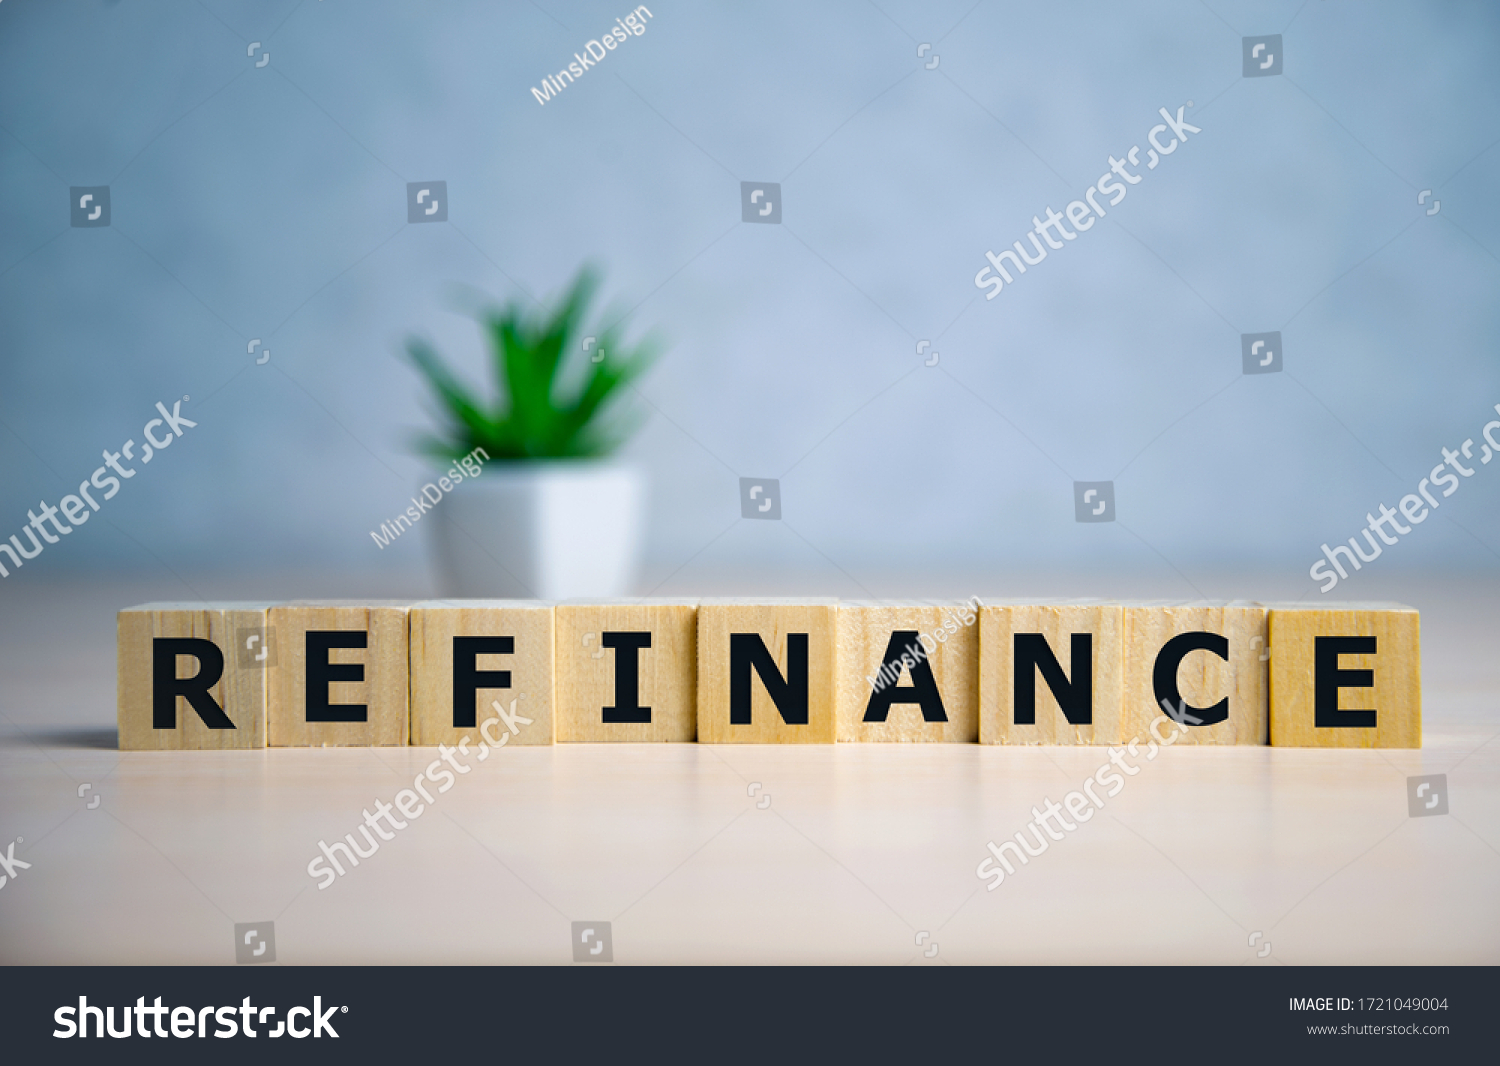 focus on wooden blocks with letters Refinance text. Concept image. #1721049004